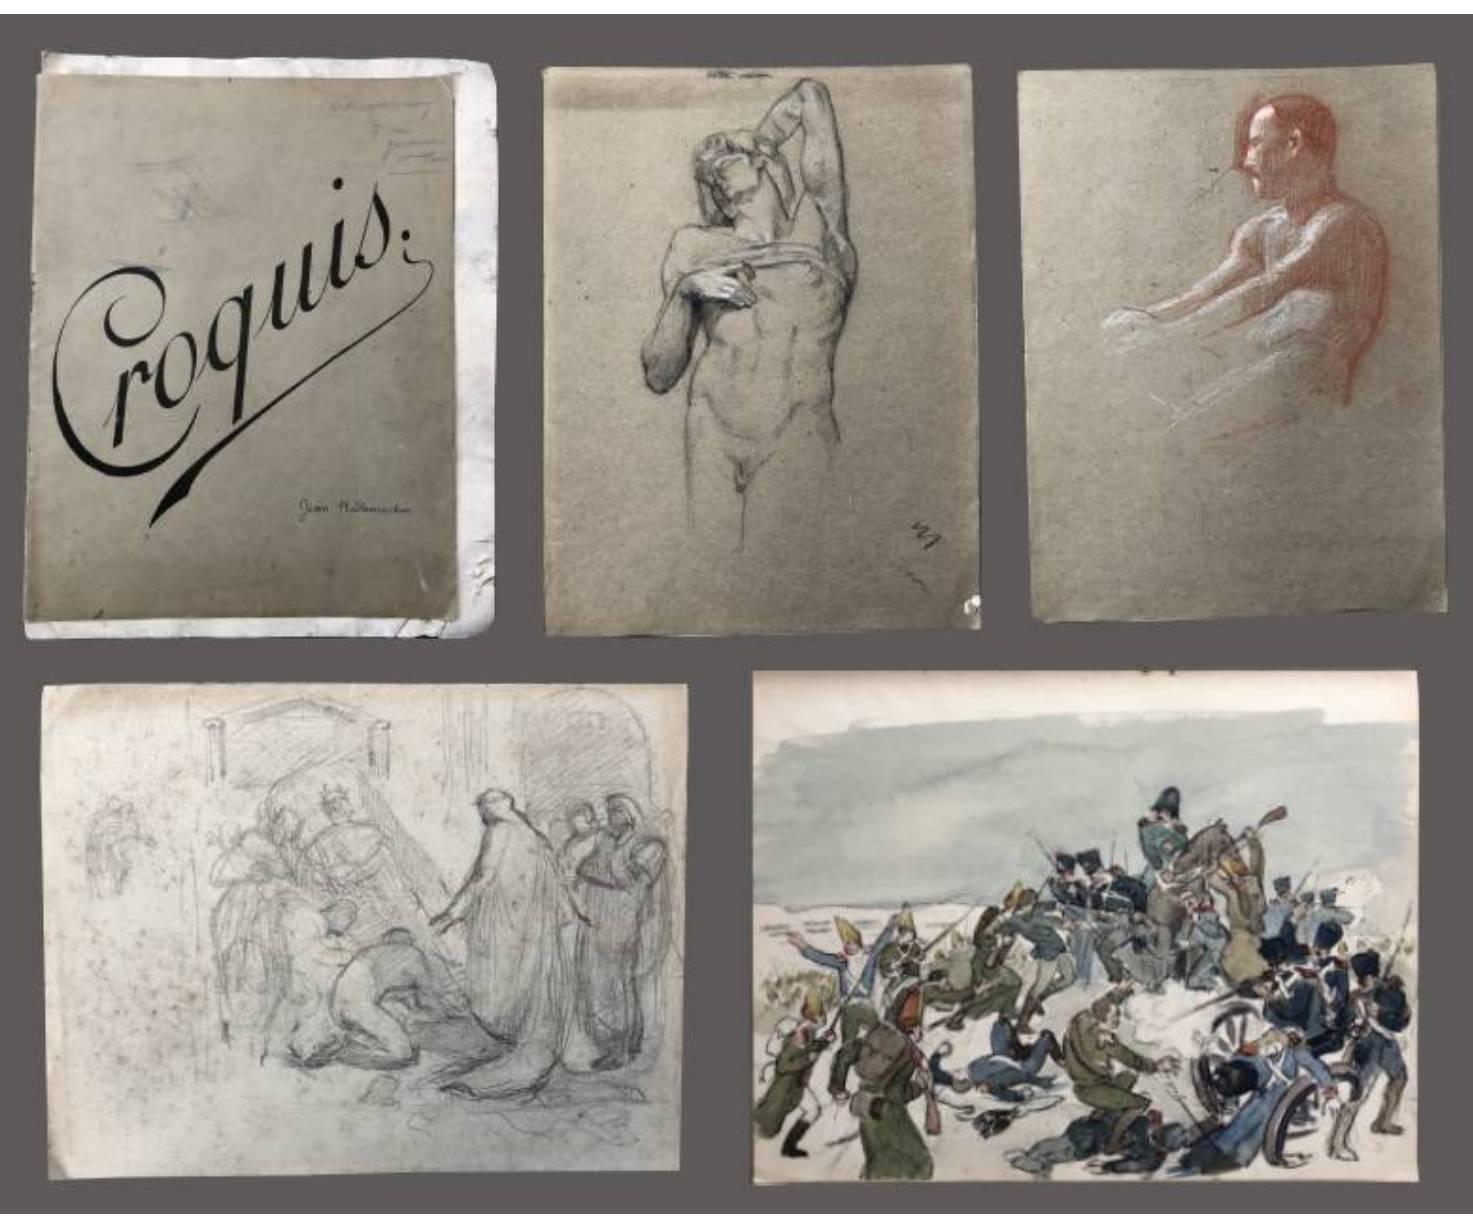 Jean Hillemacher (1889-1914)
Second Grand Prix de Rome 1913
Lot of three sketchbooks: 43 drawings.
Academic nudes, landscapes, animal studies, a watercolor battle scene.
A photograph of Paul Joseph Hillemacher in Rome in 1882, composer, uncle of the